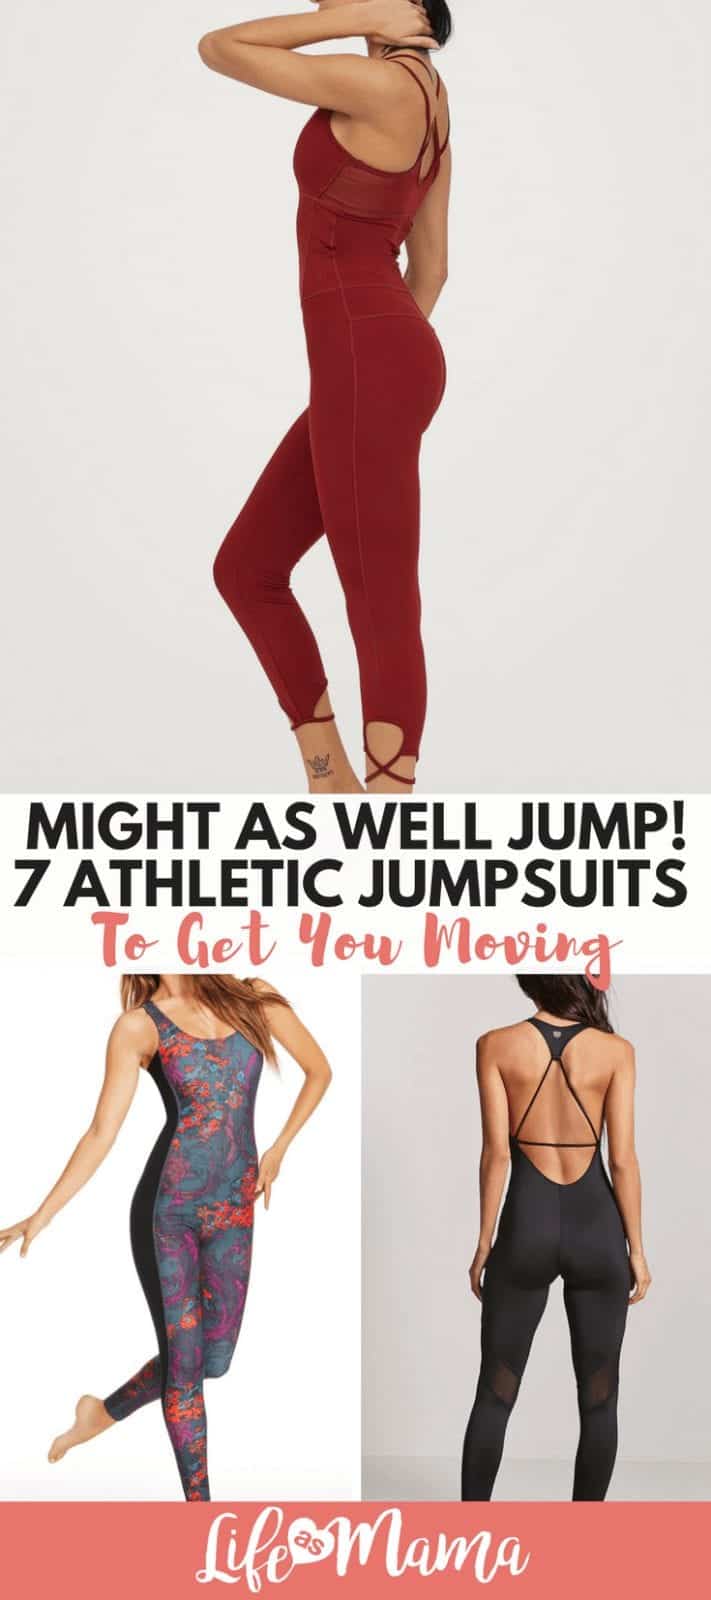 Might As Well Jump! 7 Athletic Jumpsuits to Get You Moving.1